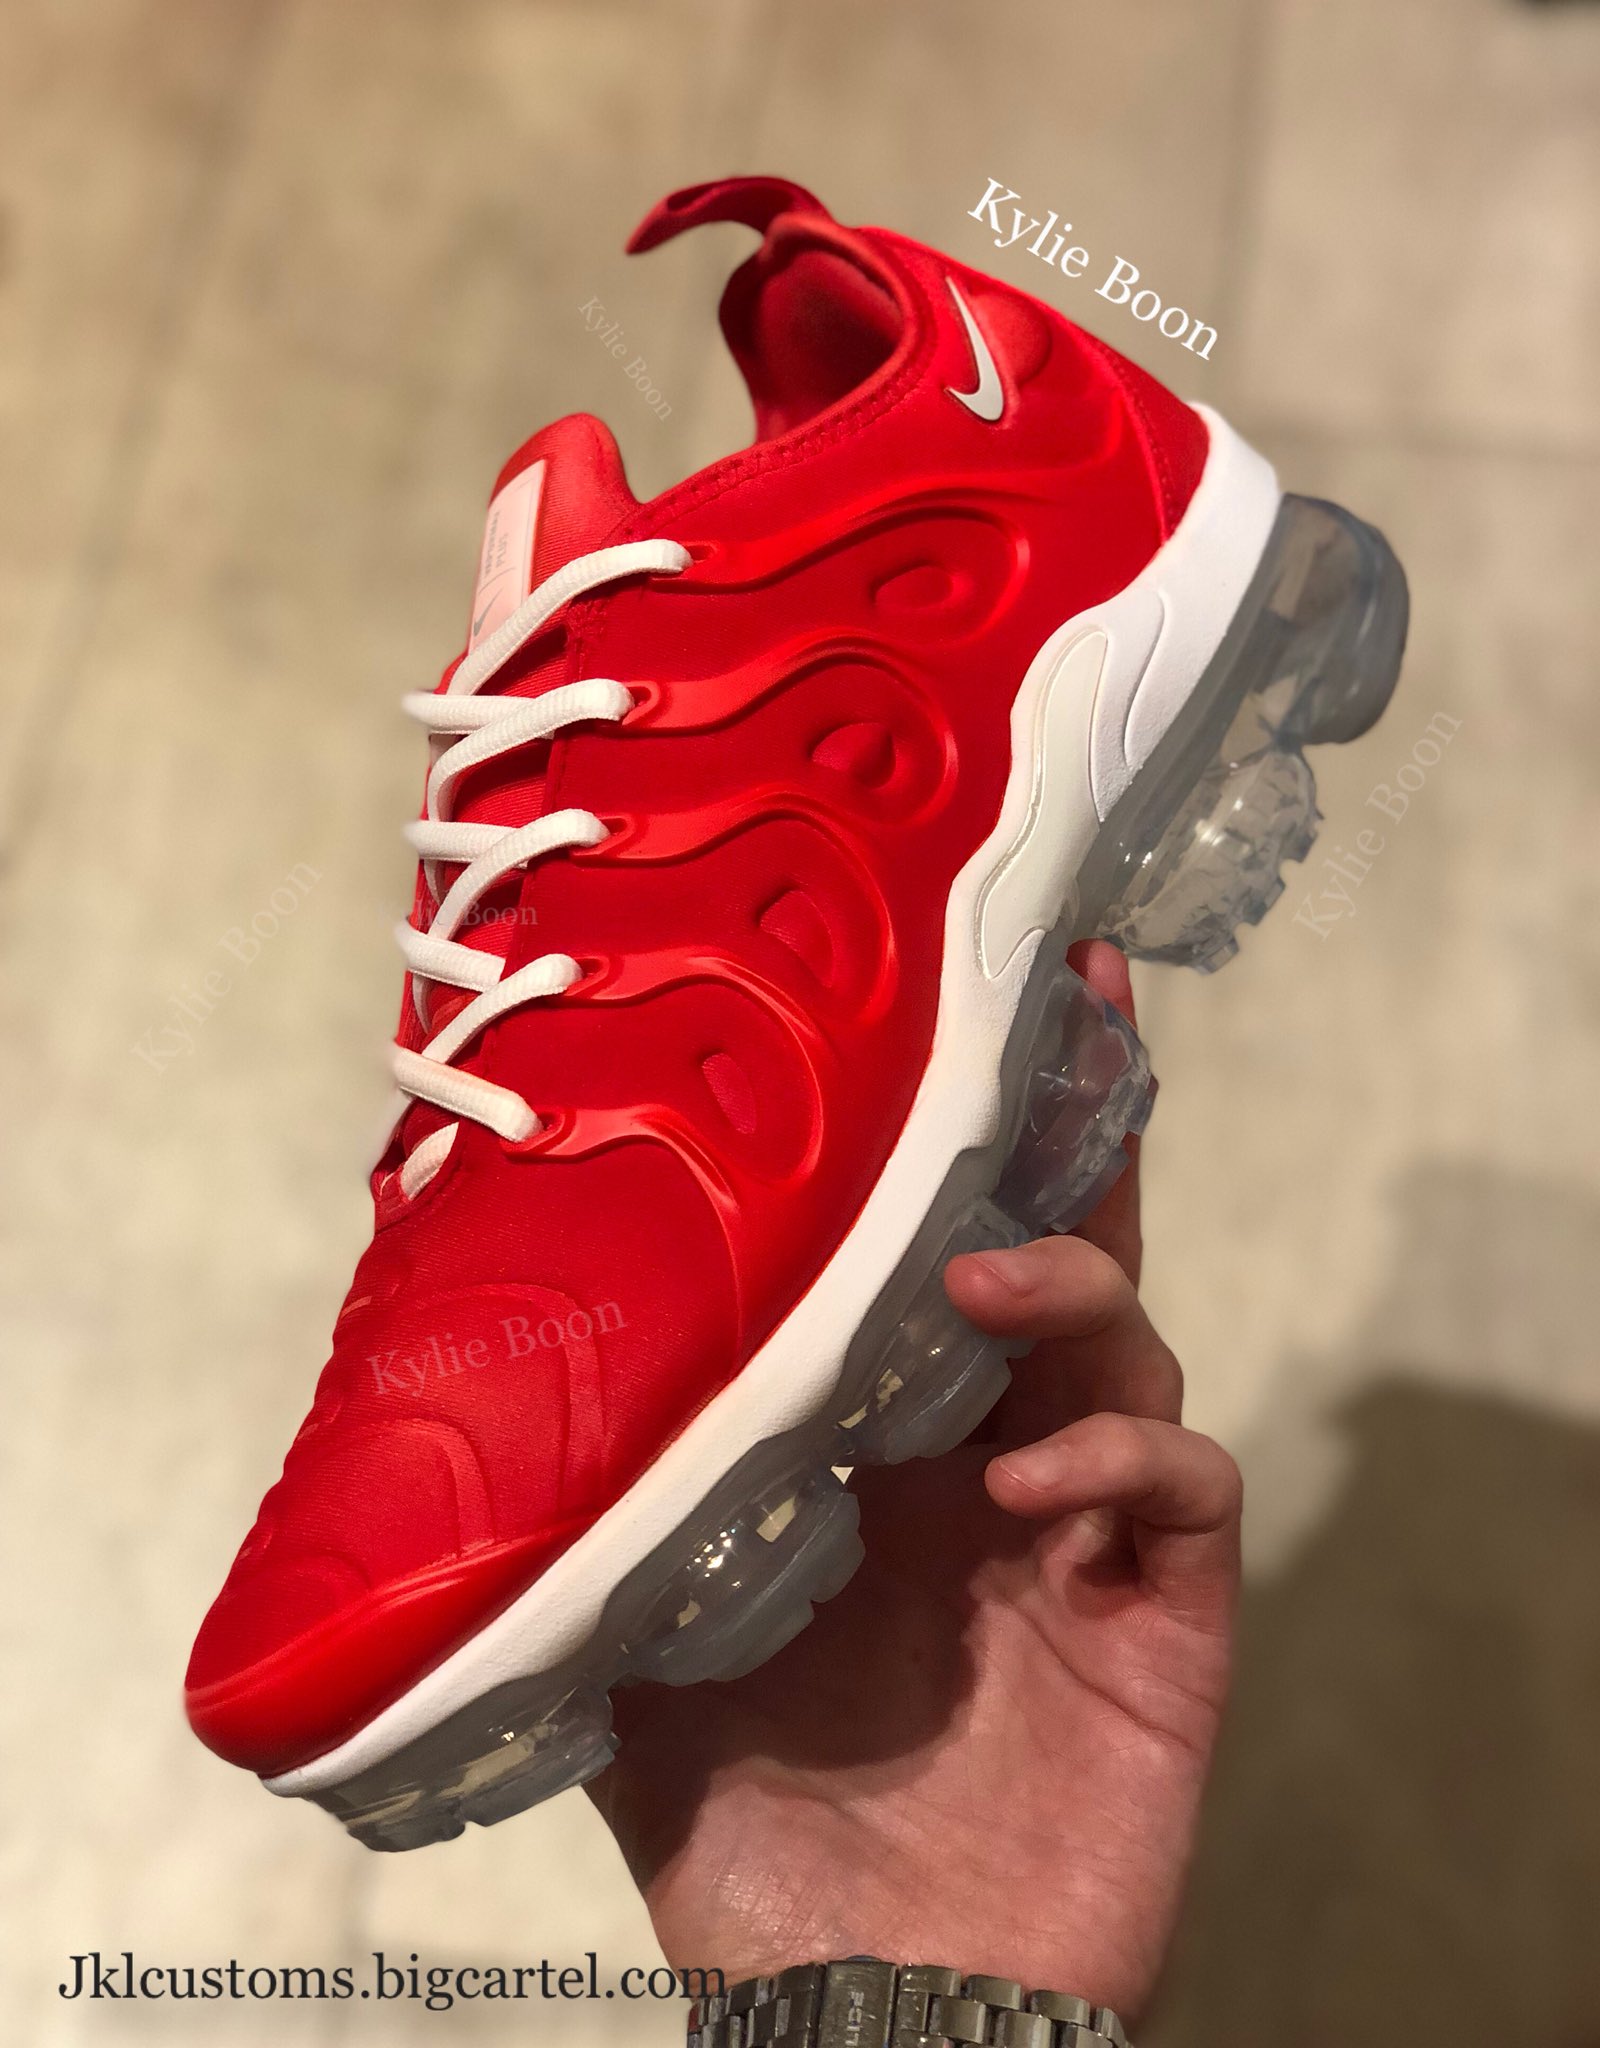 Kylie Boon Art в Twitter: „What do you all think of my new beauties? NIKE VAPORMAX PLUS “chilli” These are ready to purchase on my website Oh and If you're a